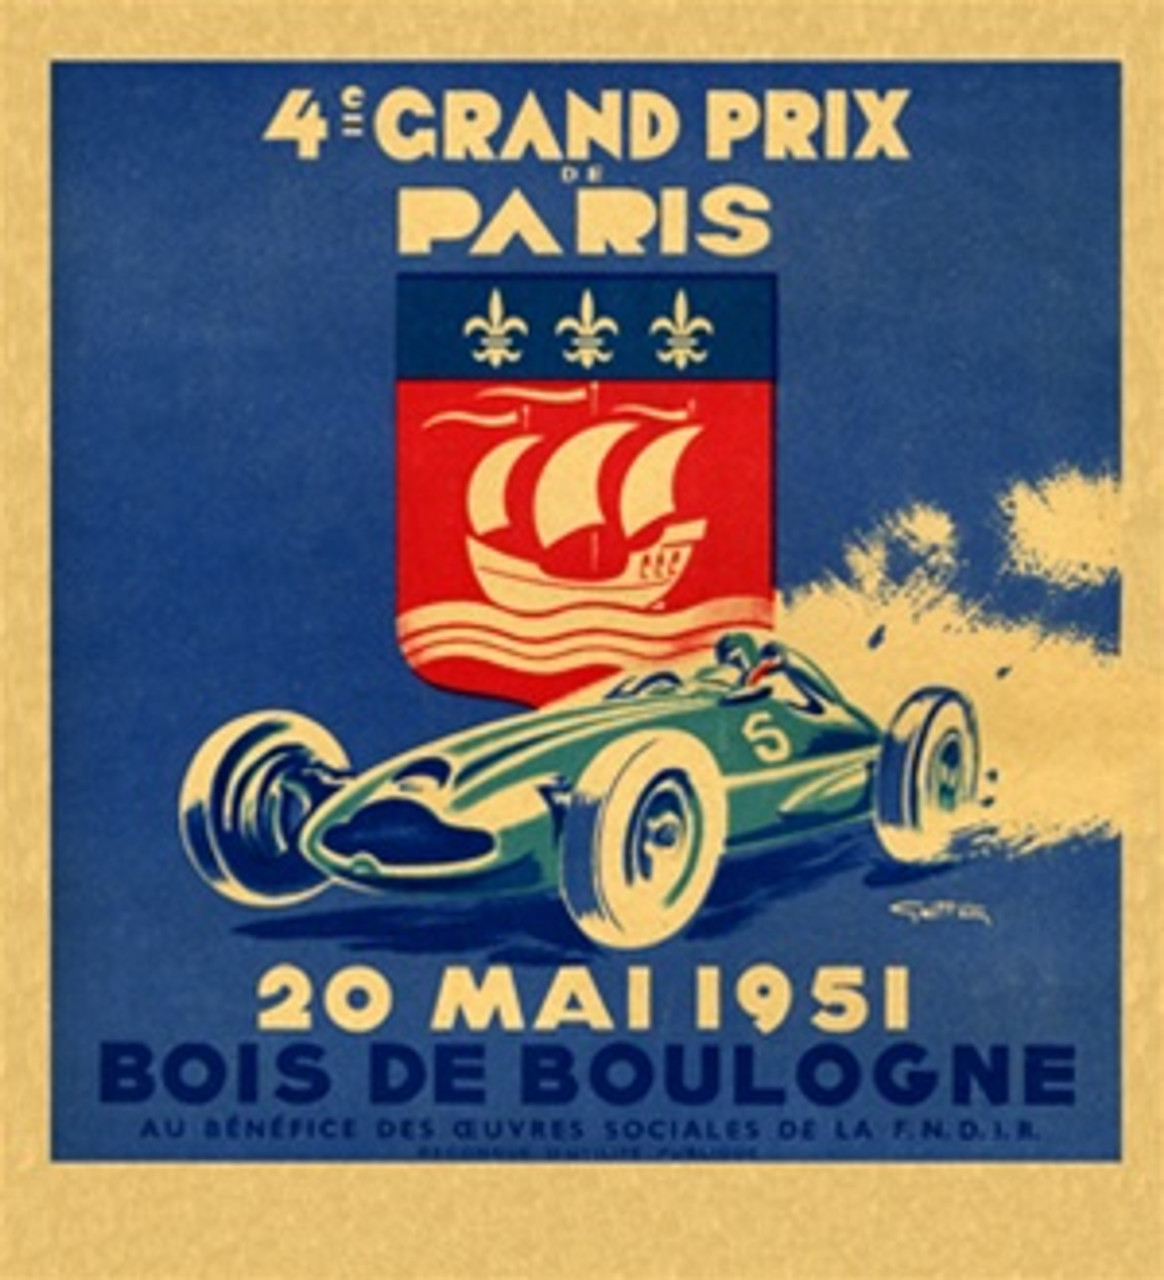 4ie Grand Prix de Paris by G. Ham 1951 France - Vintage Poster Reproductions. This vertical French transportation poster features race car number 5 with a seal behind it of a ship against a blue background. Giclee Advertising Print. Classic Posters